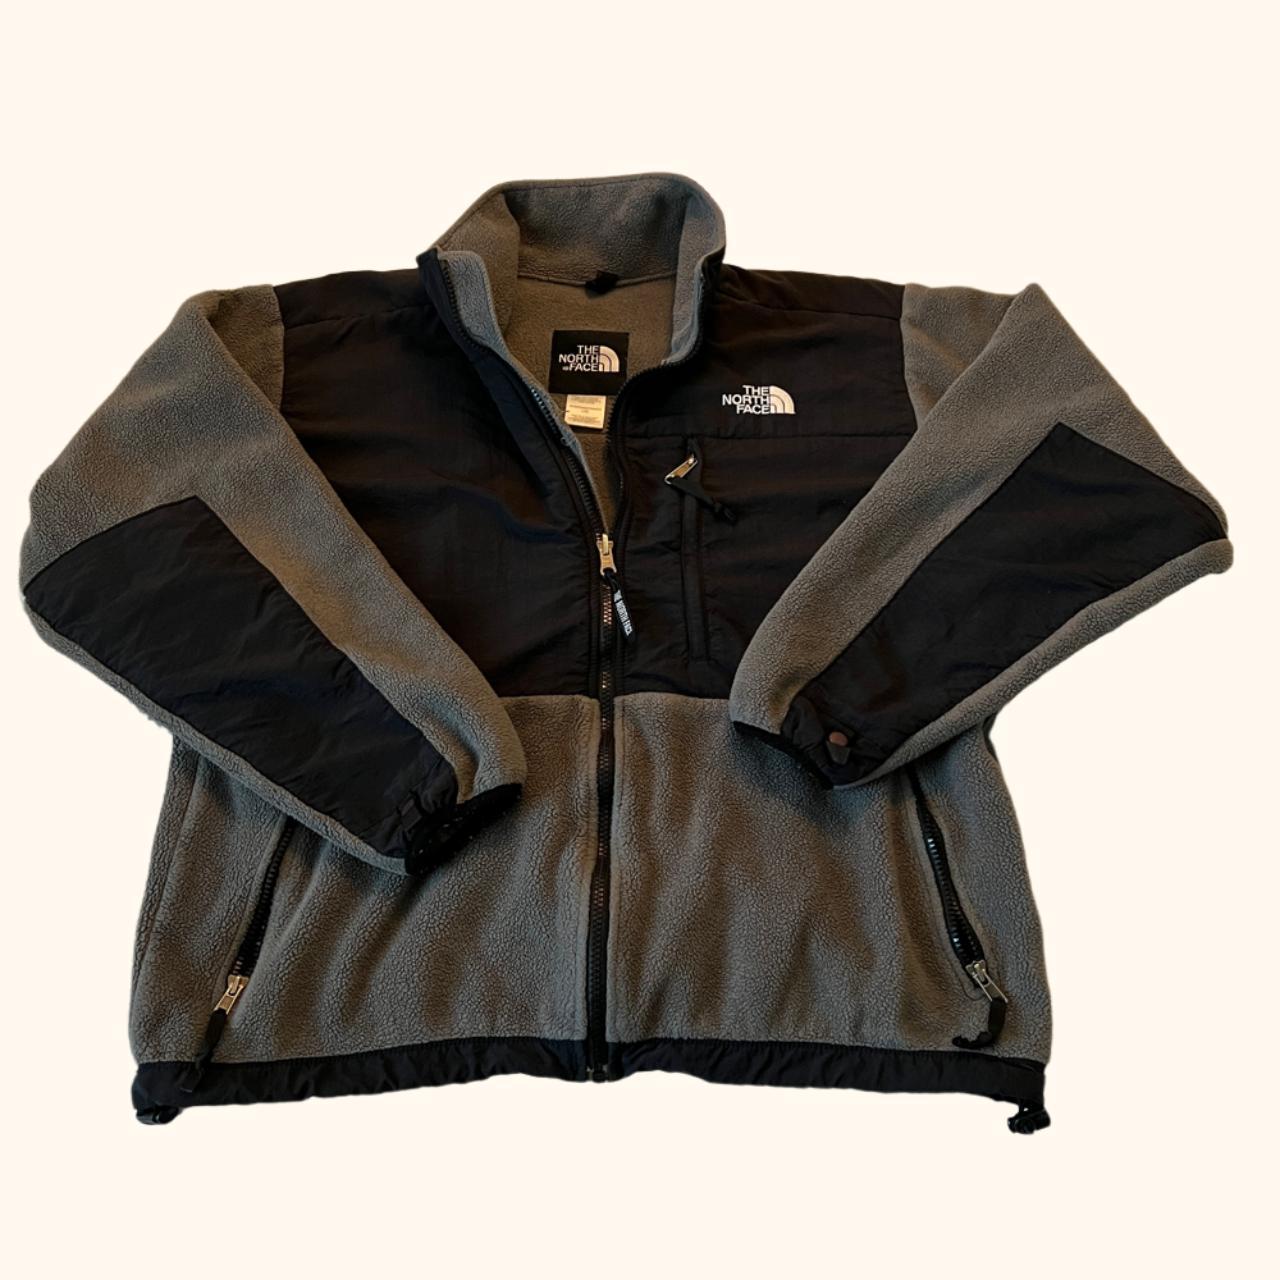 The North Face Men's Black and Grey Jacket